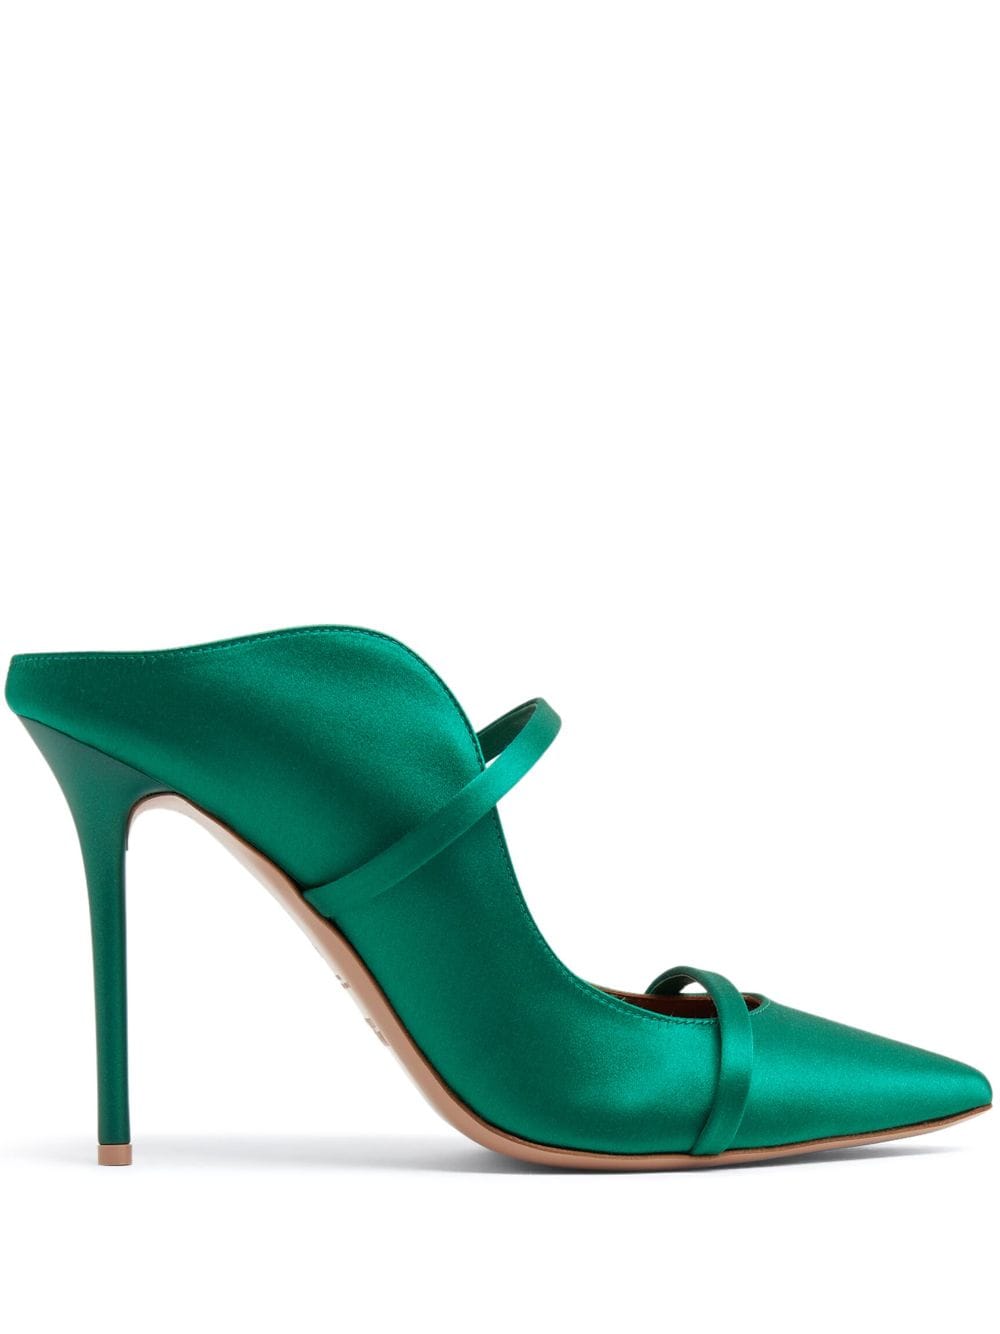 Malone Souliers Maureen 100mm leather pumps - Green von Malone Souliers